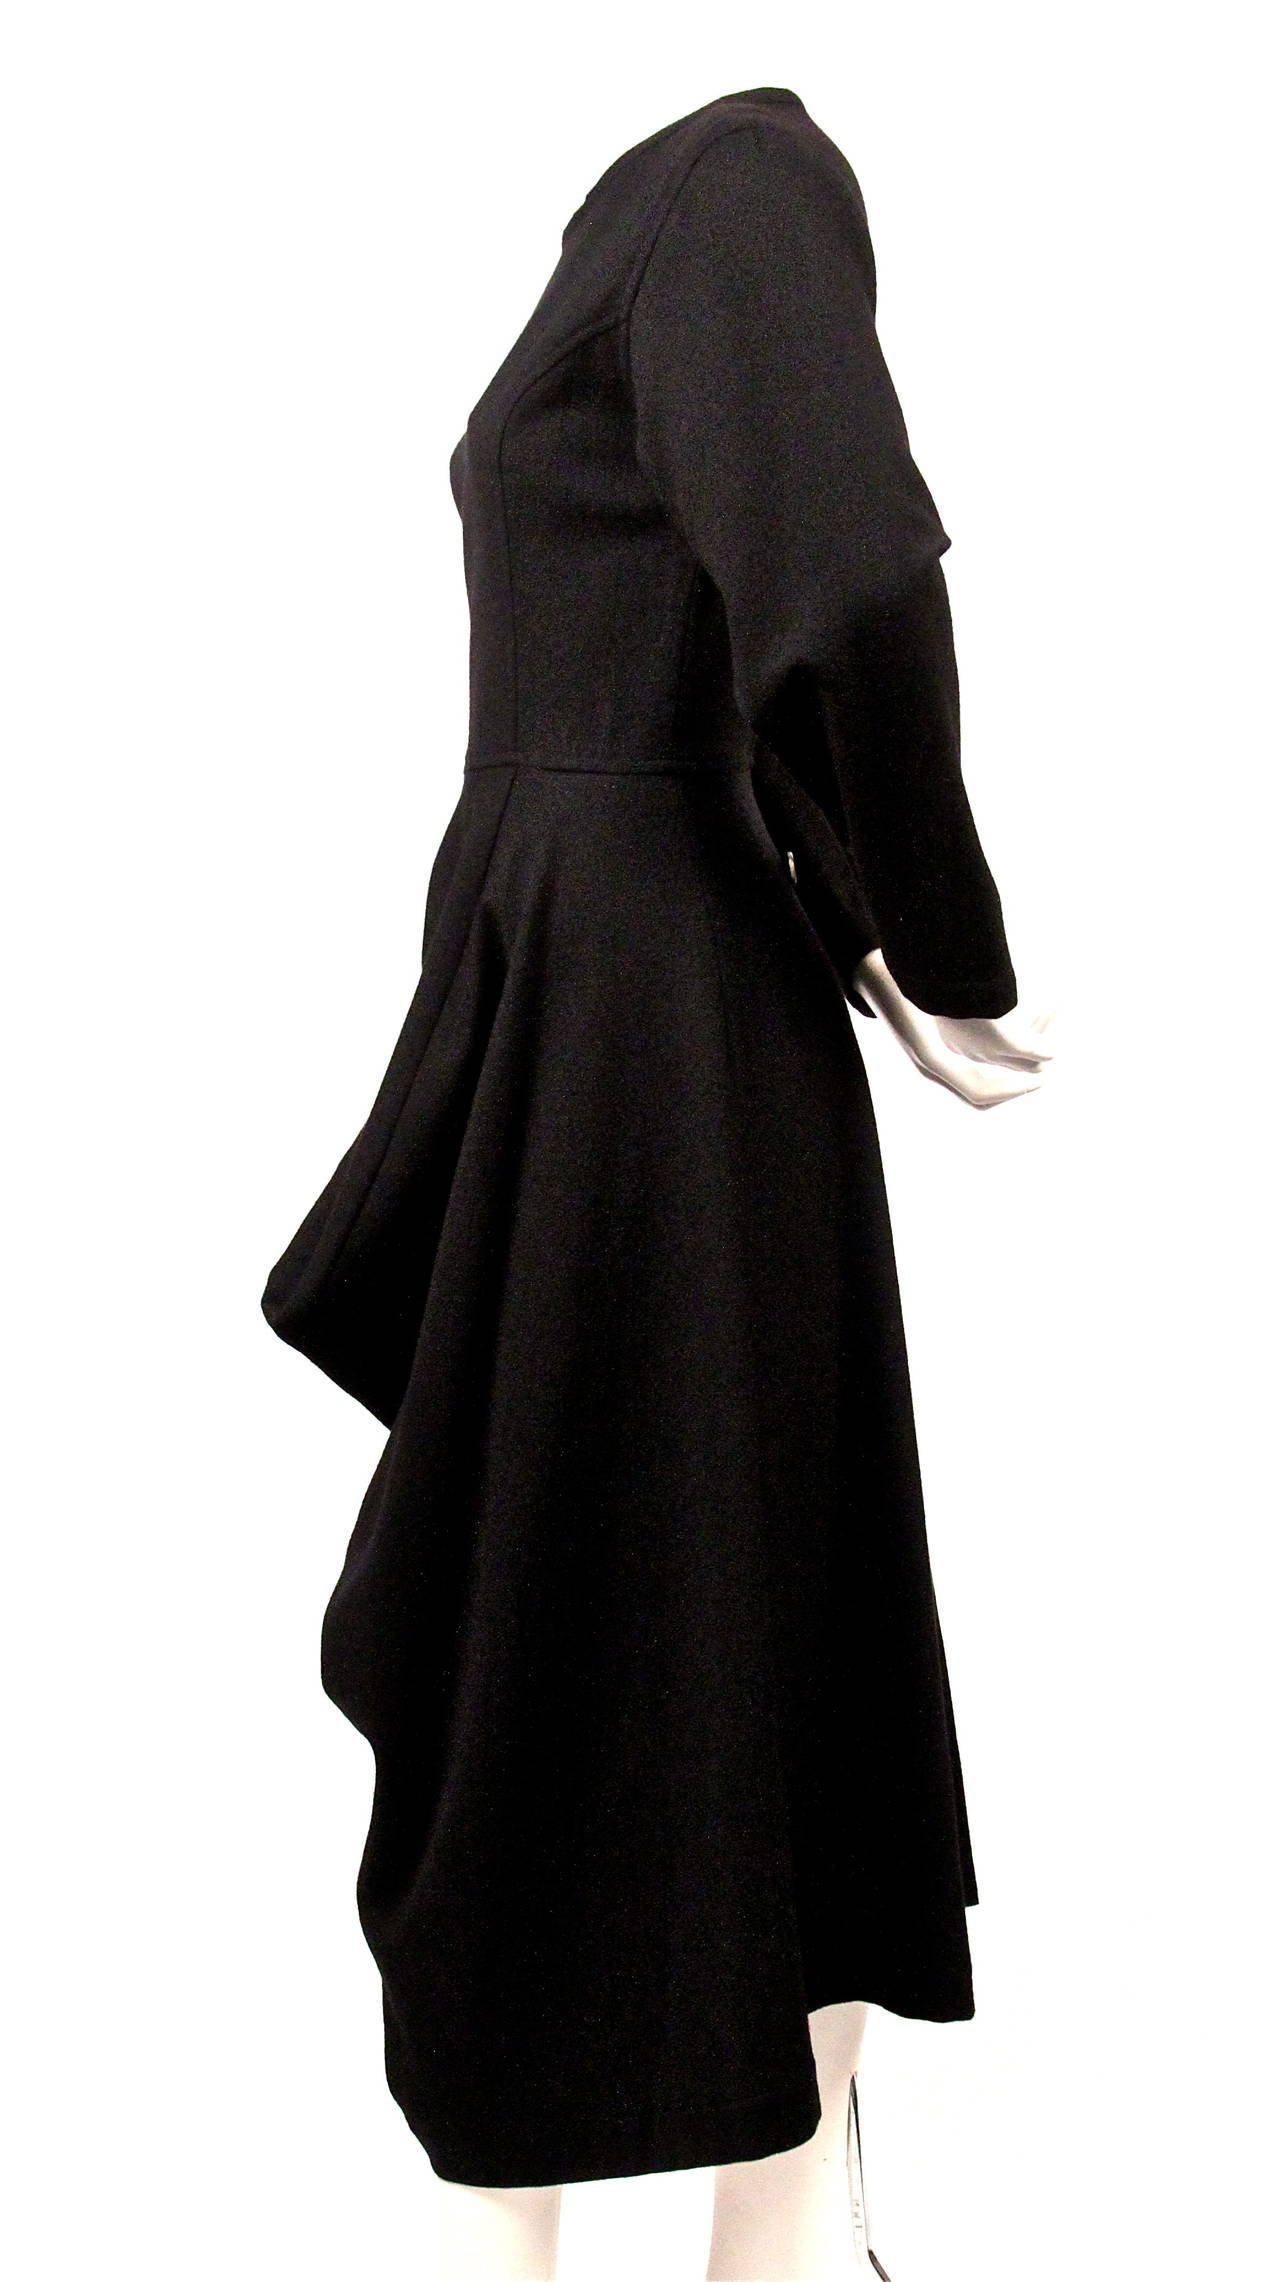 Jet black asymmetrically cut wool dress with draped panel from Comme des Garcons dating to fall of 1985. Dress is labeled a size 'S'. Approximate measurements: shoulders 16